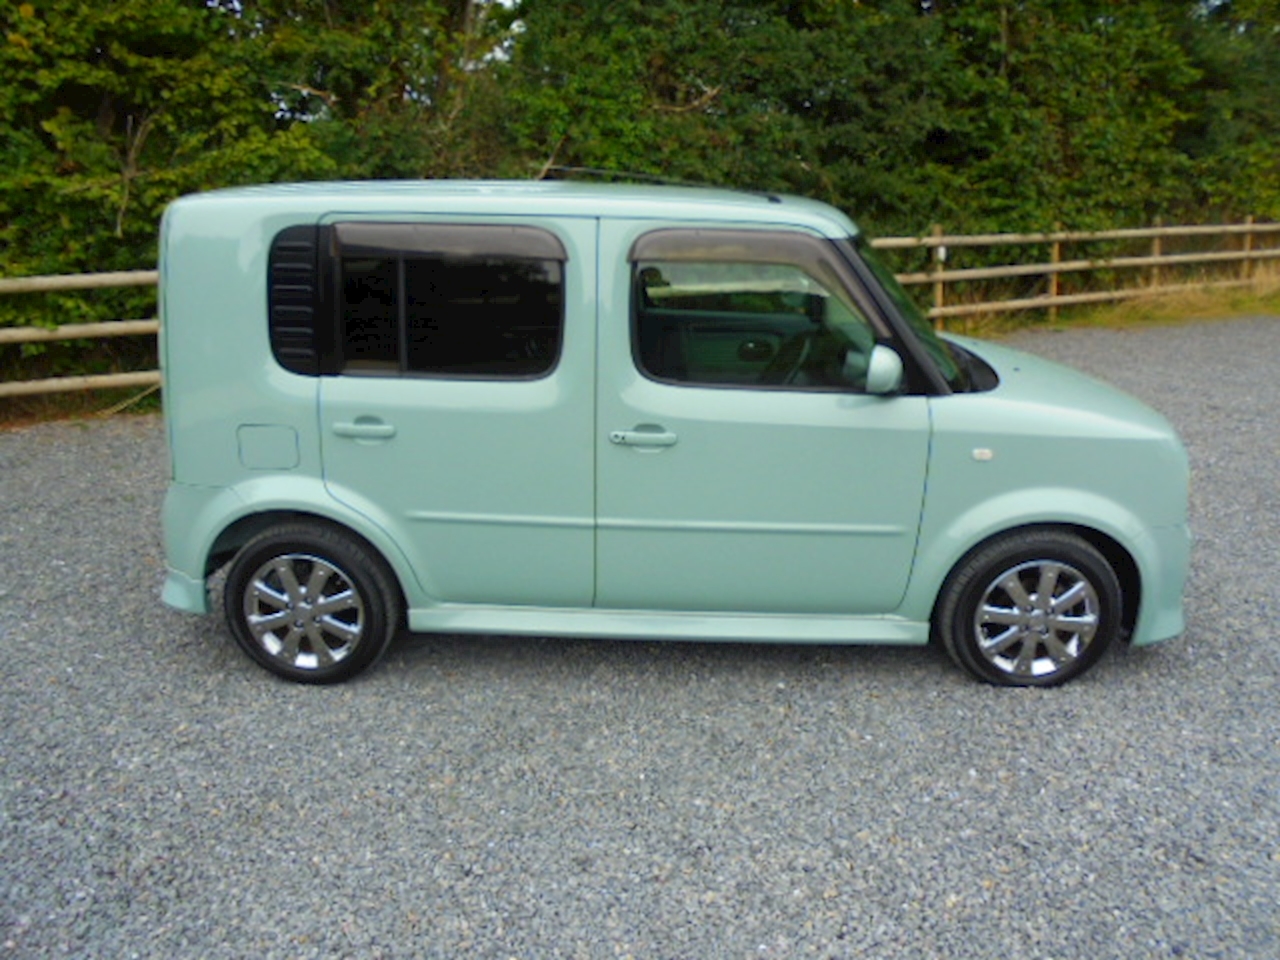 Used Nissan Cube 1.5 Rider | Car Imports Direct Ltd t/a Winterstoke Motor  Company - Clevedon